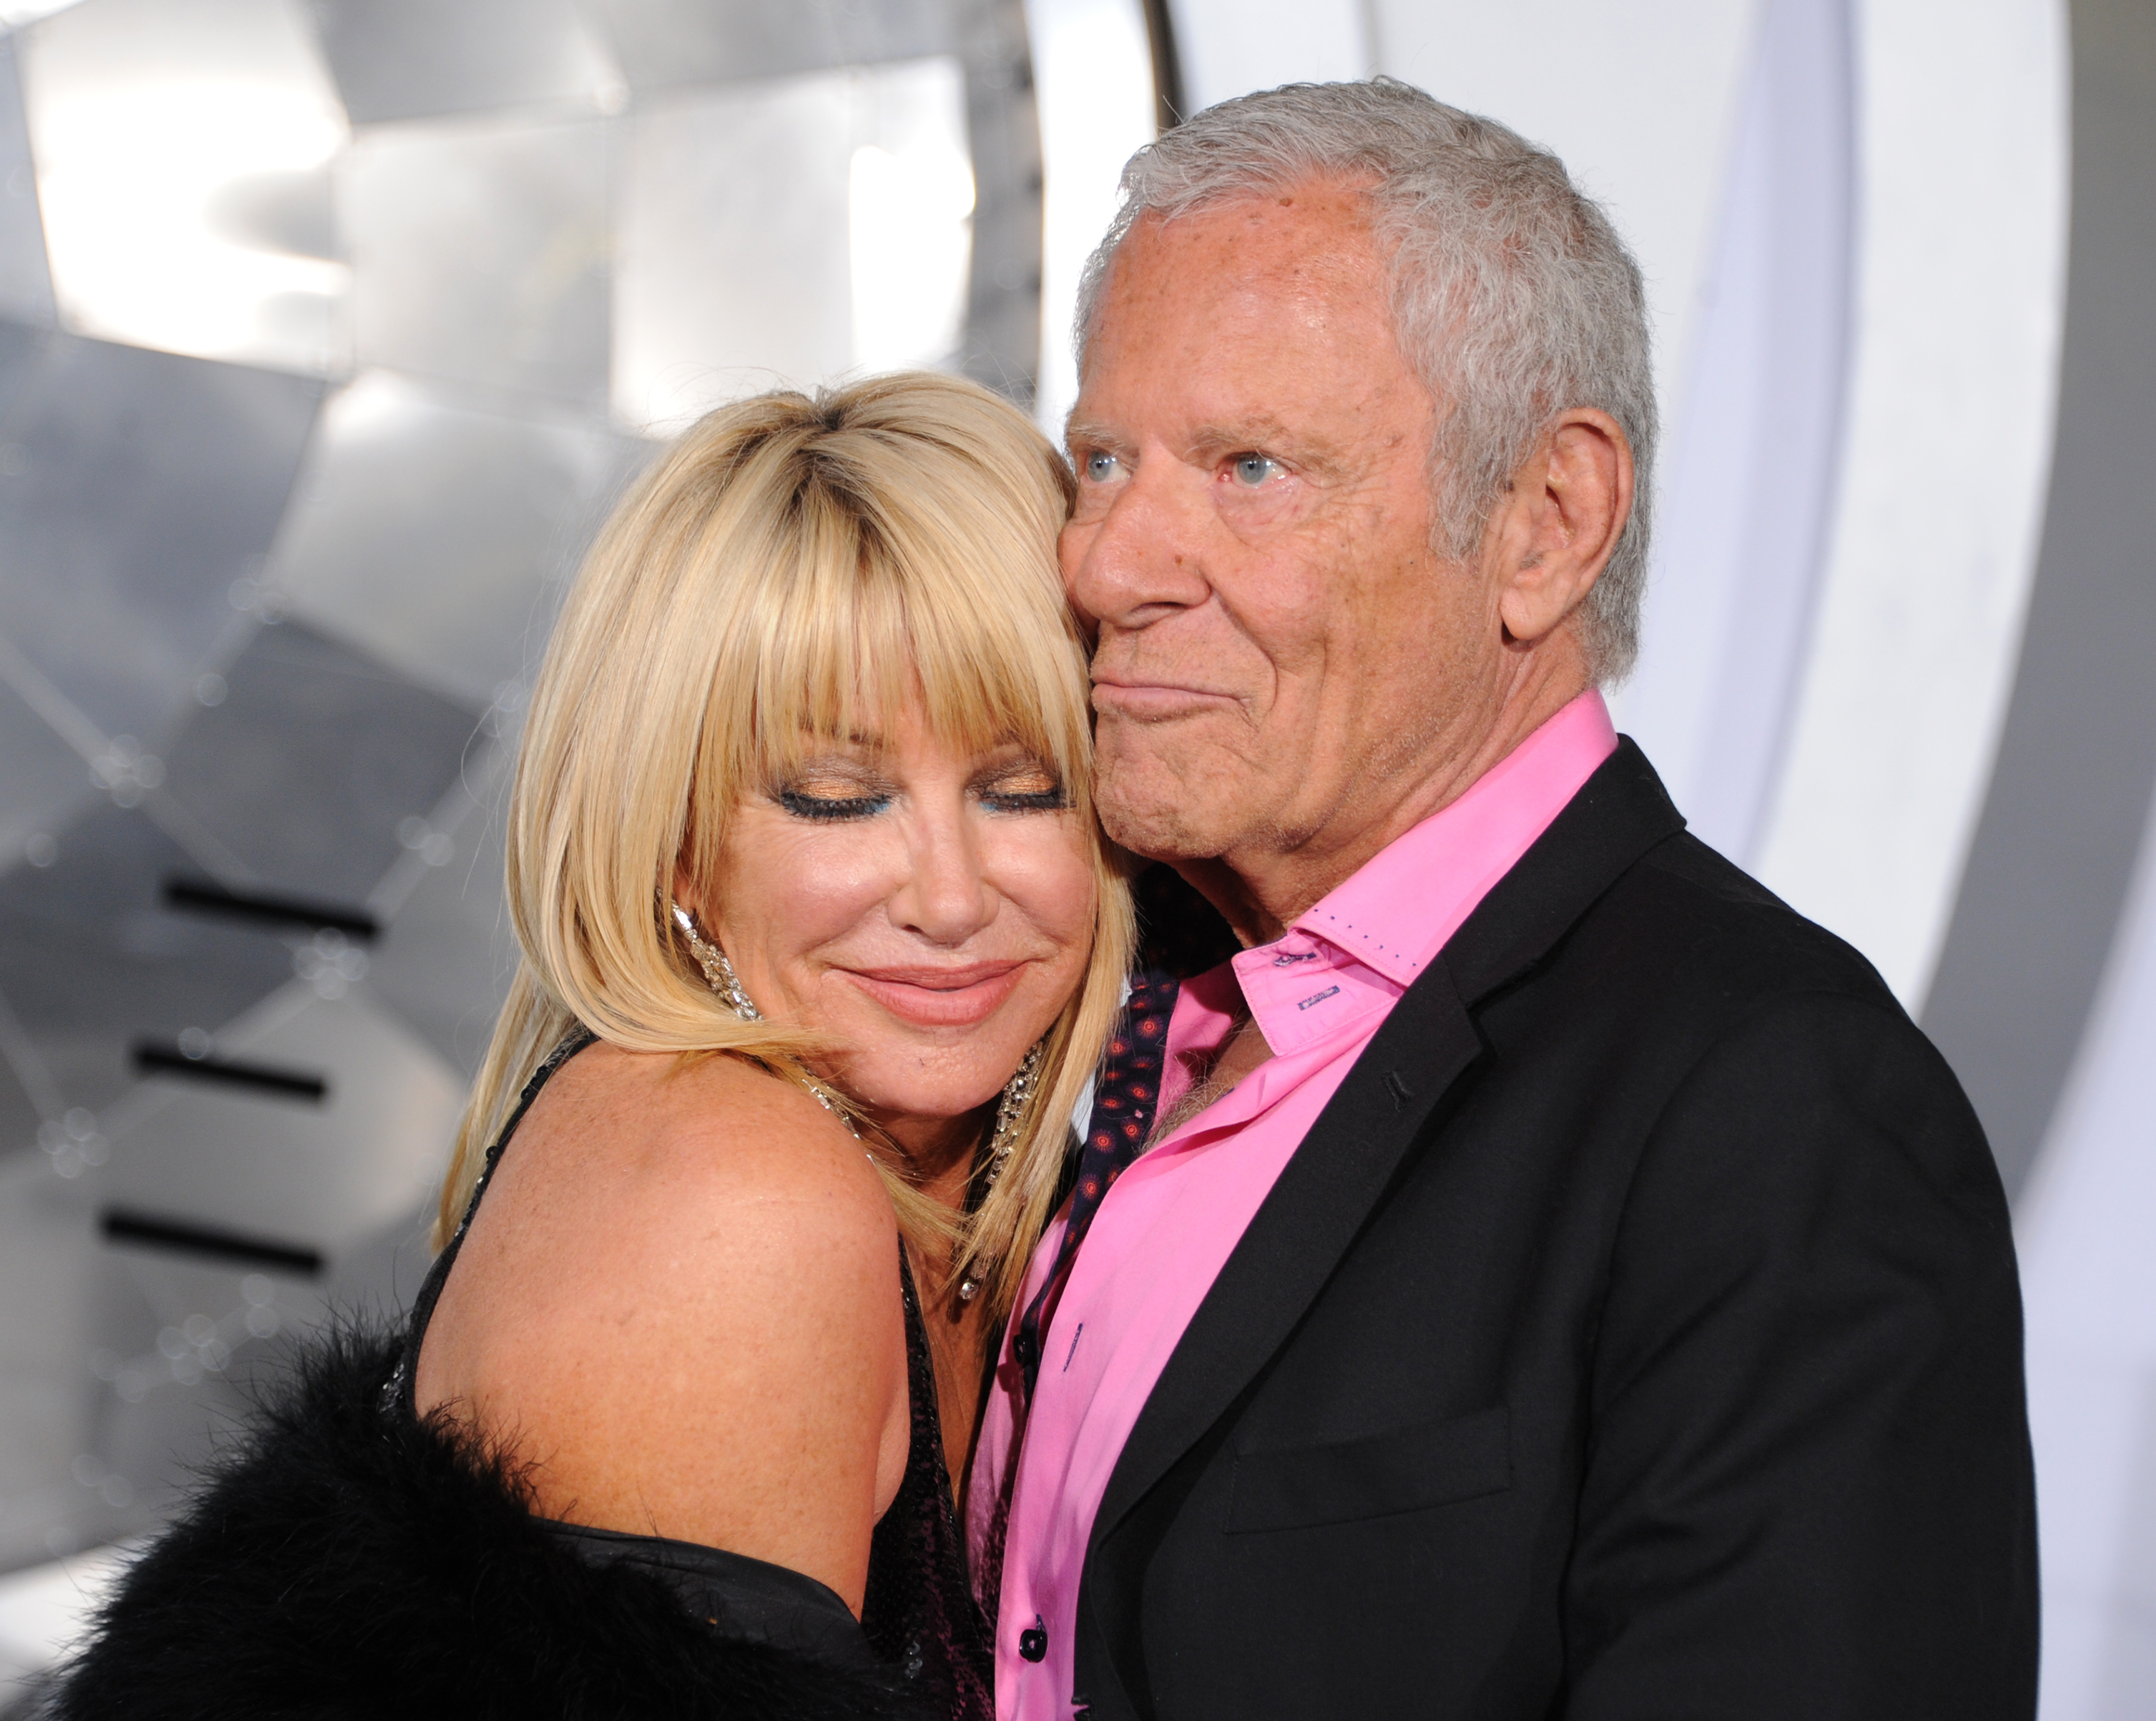 Suzanne Somers and her husband Alan Hamel at the premiere of "Passengers" on December 14, 2016, in Westwood, California | Source: Getty Images